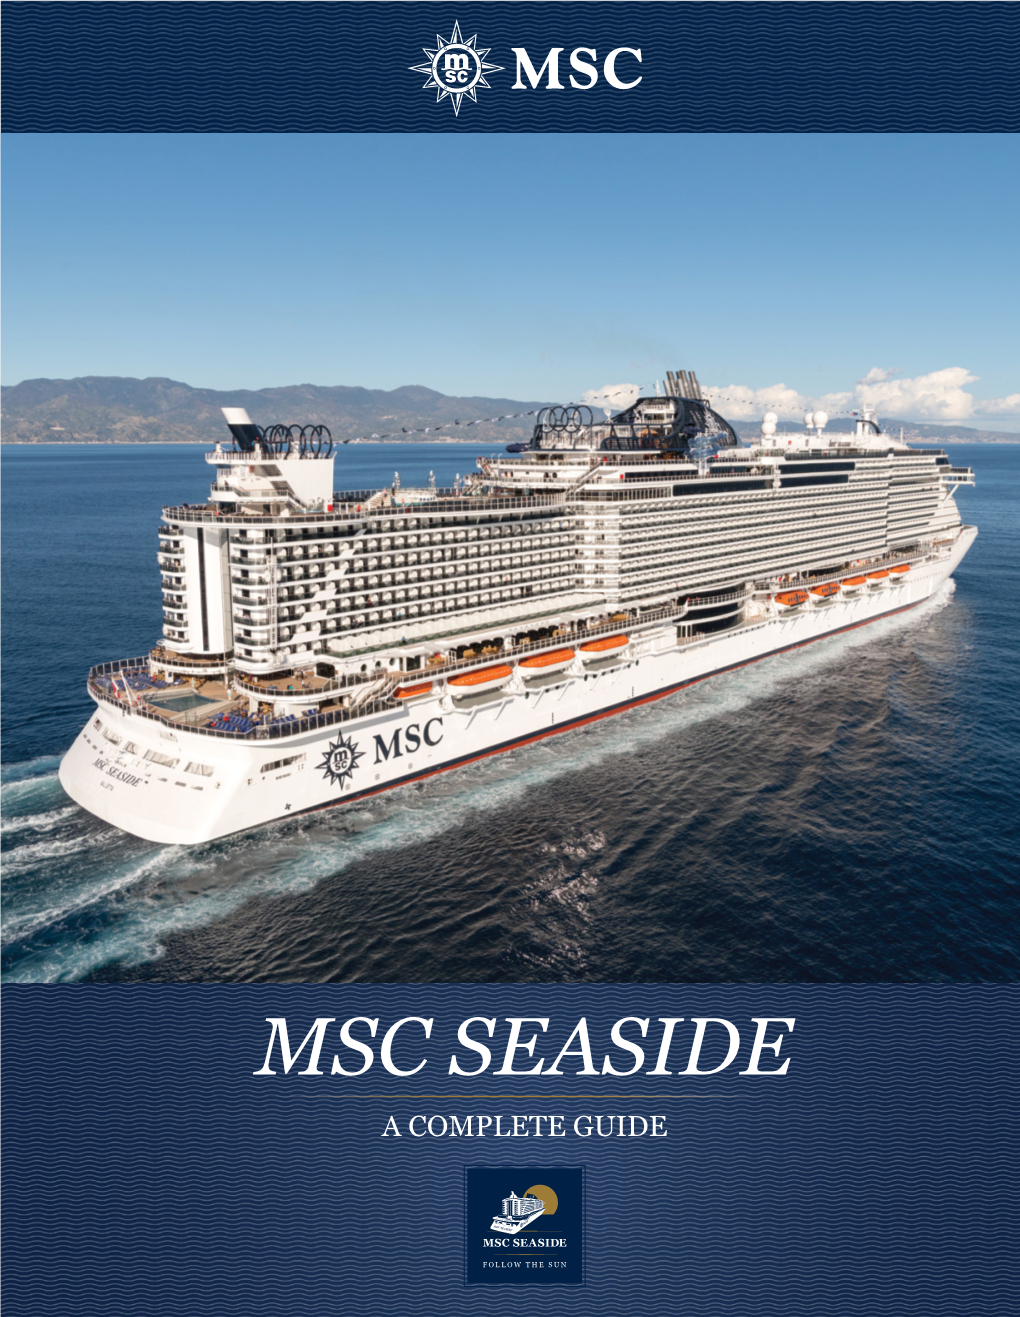 Msc Seaside a Complete Guide Content Introducing Msc Seaside the Ship That Follows the Sun